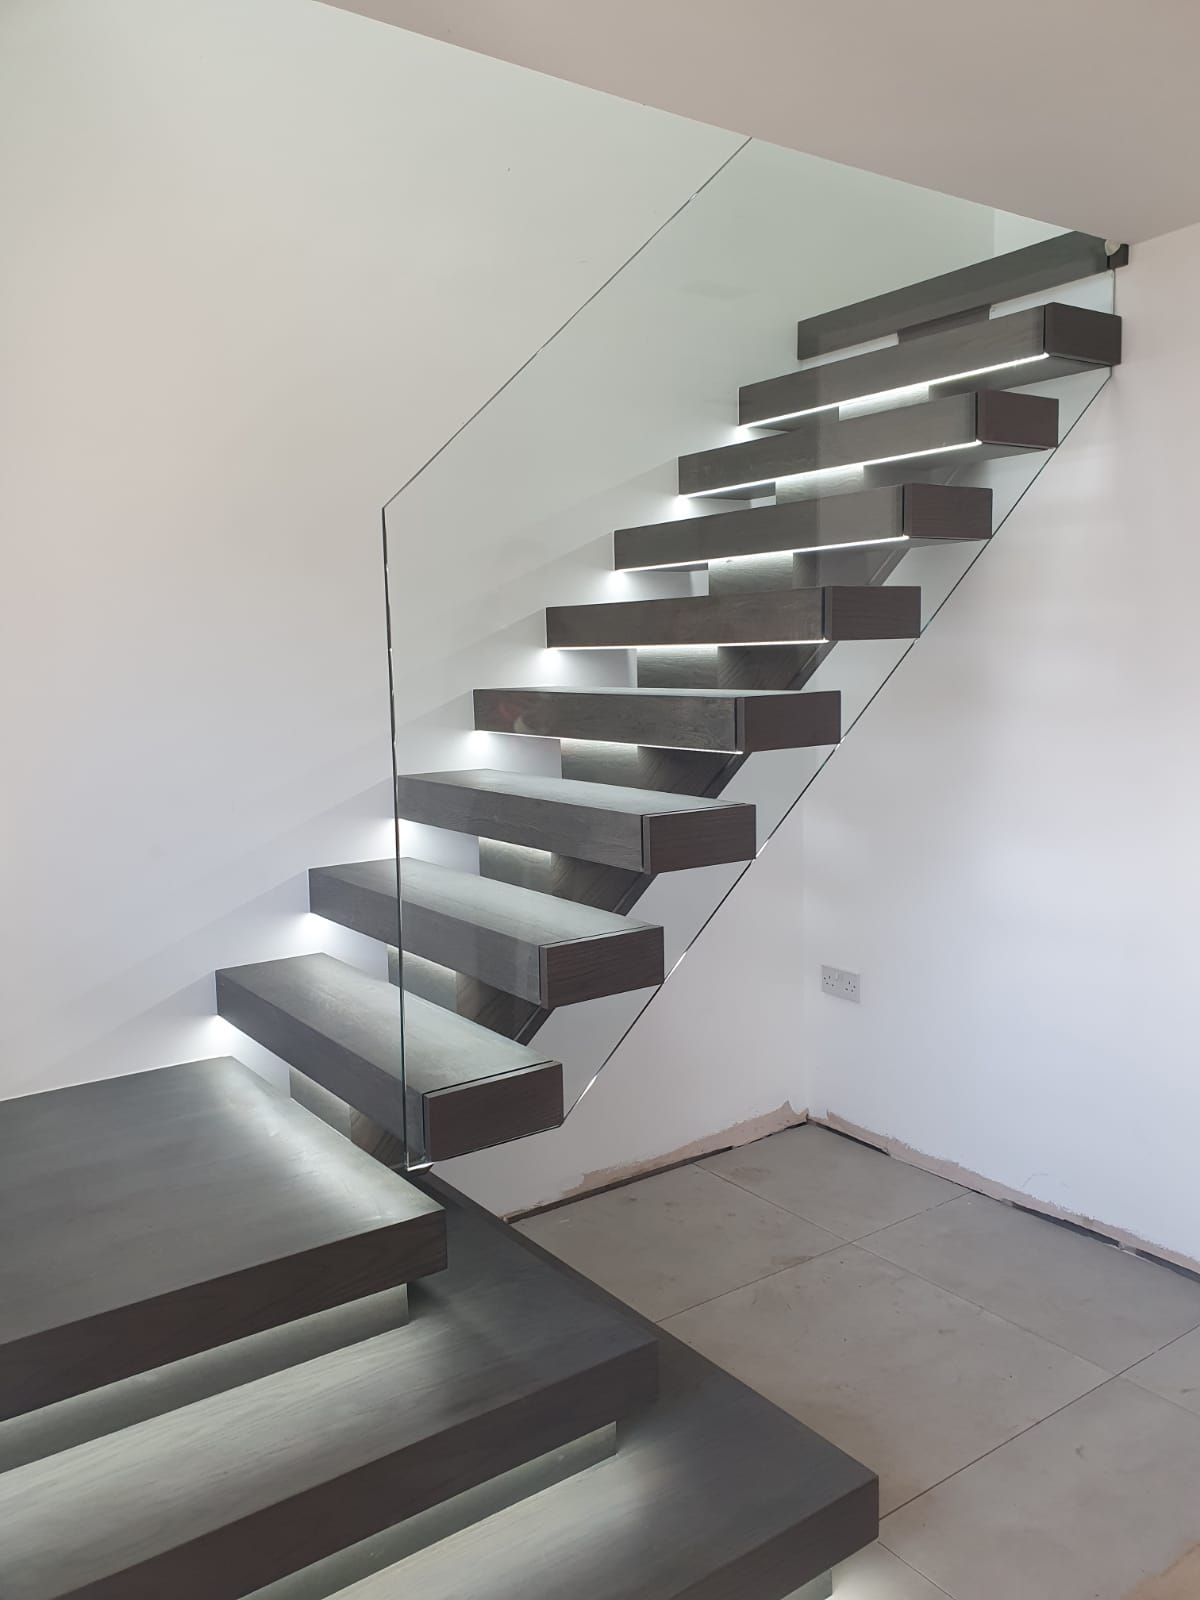 A floating staircase in black with glass panels and under stair lighting